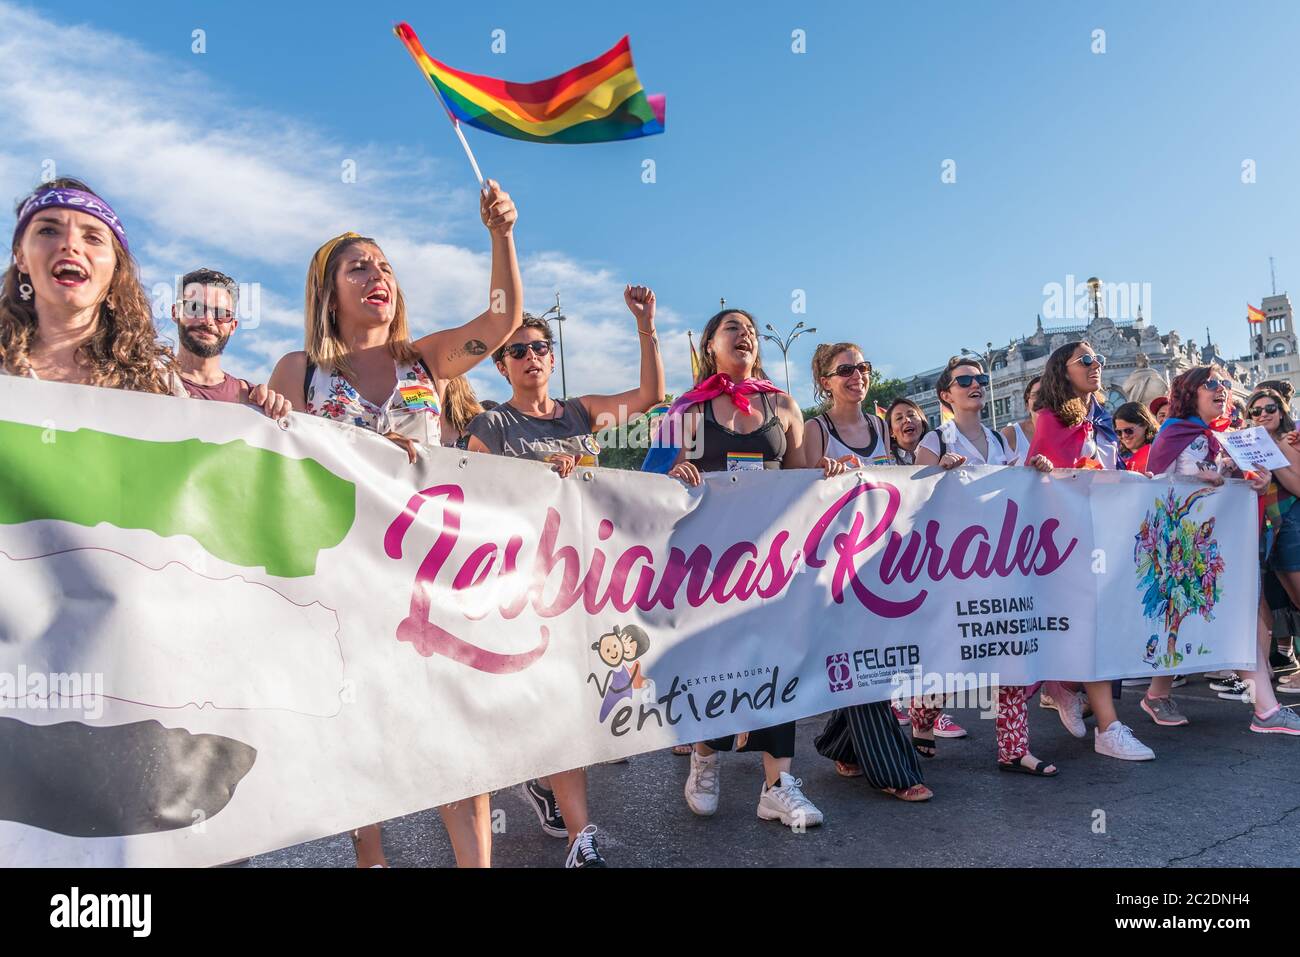 Madrid, Spain - July 06, 2019: in Madrid, Gay pride day celebrations. A group of lesbians standing in front of a crowd Stock Photo